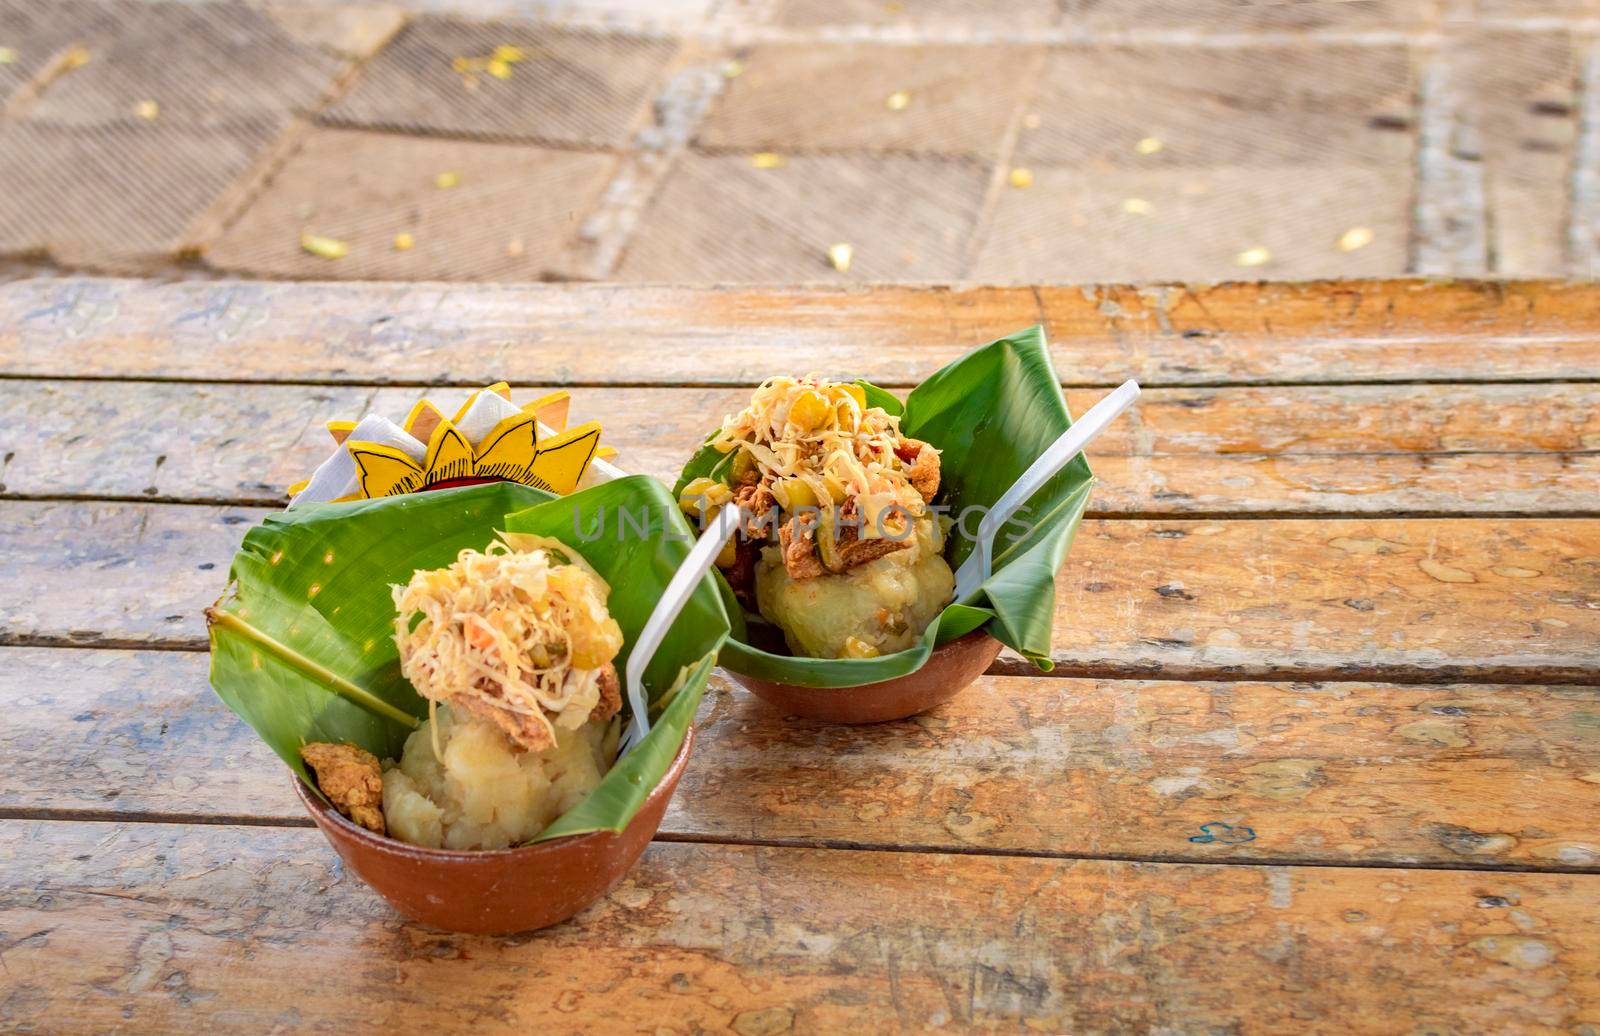 Vigorón with leaves served on a wooden table, two vigorones served on wooden background, vigorón typical food from nicaragua